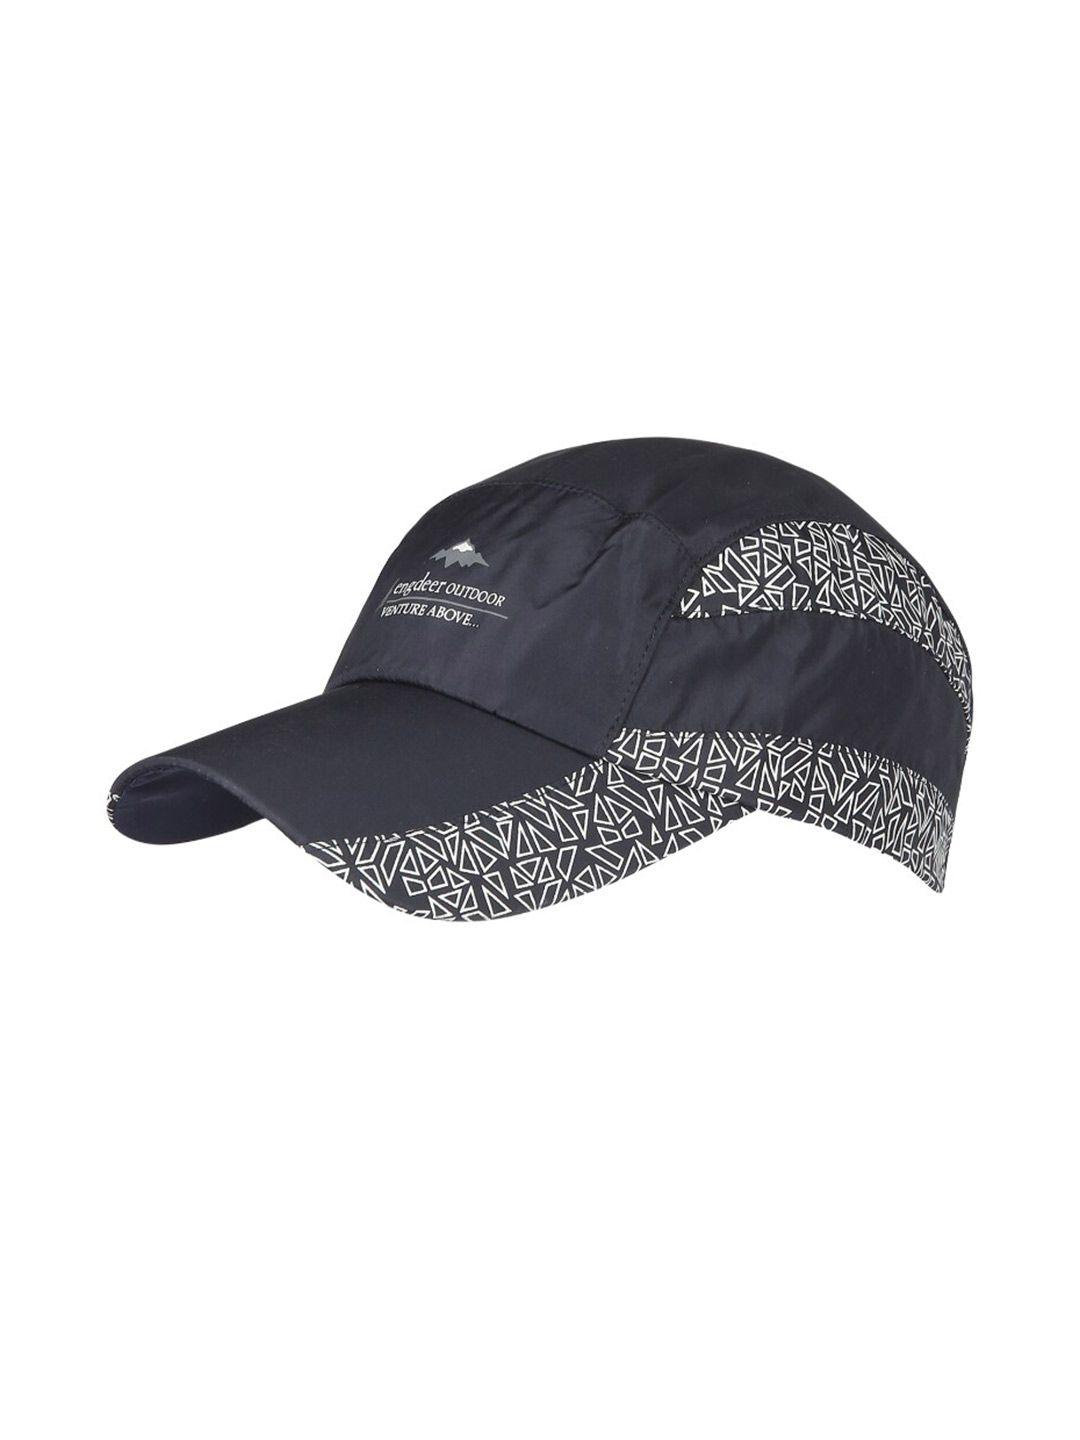 isweven unisex navy blue & white printed snapback cap